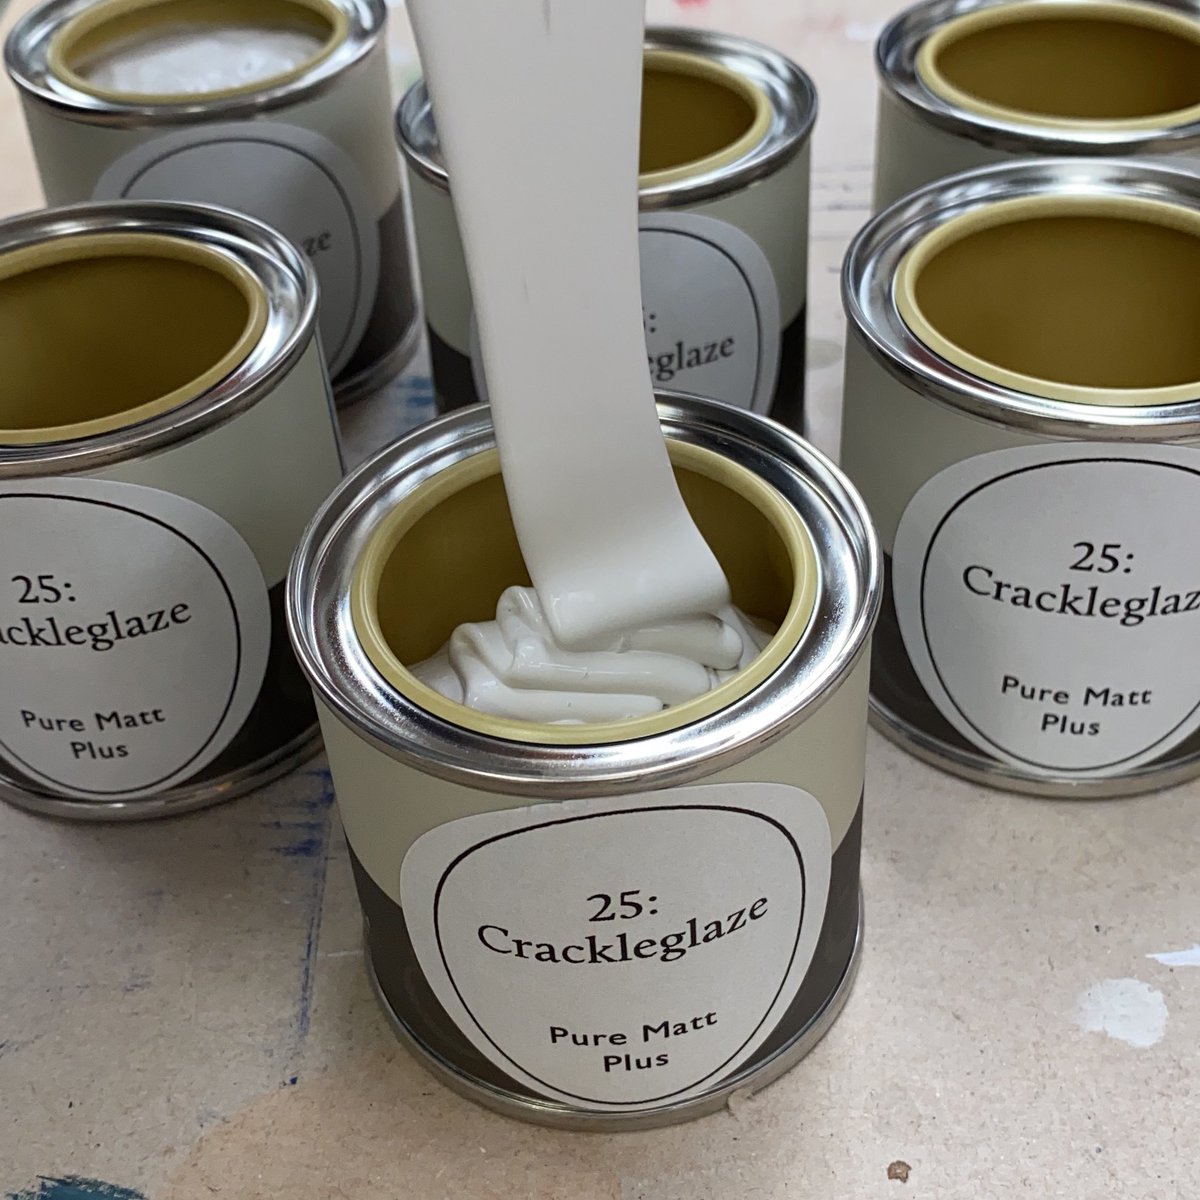 Y O U R F A V O U R I T E // this is ‘Crackleglaze’ it’s our best selling off-white. This delicate warm grey based neutral is a real all-rounder #fenwickandtilbrook #neutralstyle #neutraldecor #whitepaint #offwhite #neutrals #paintcolours #perfectwhite #interiorpaint #diy